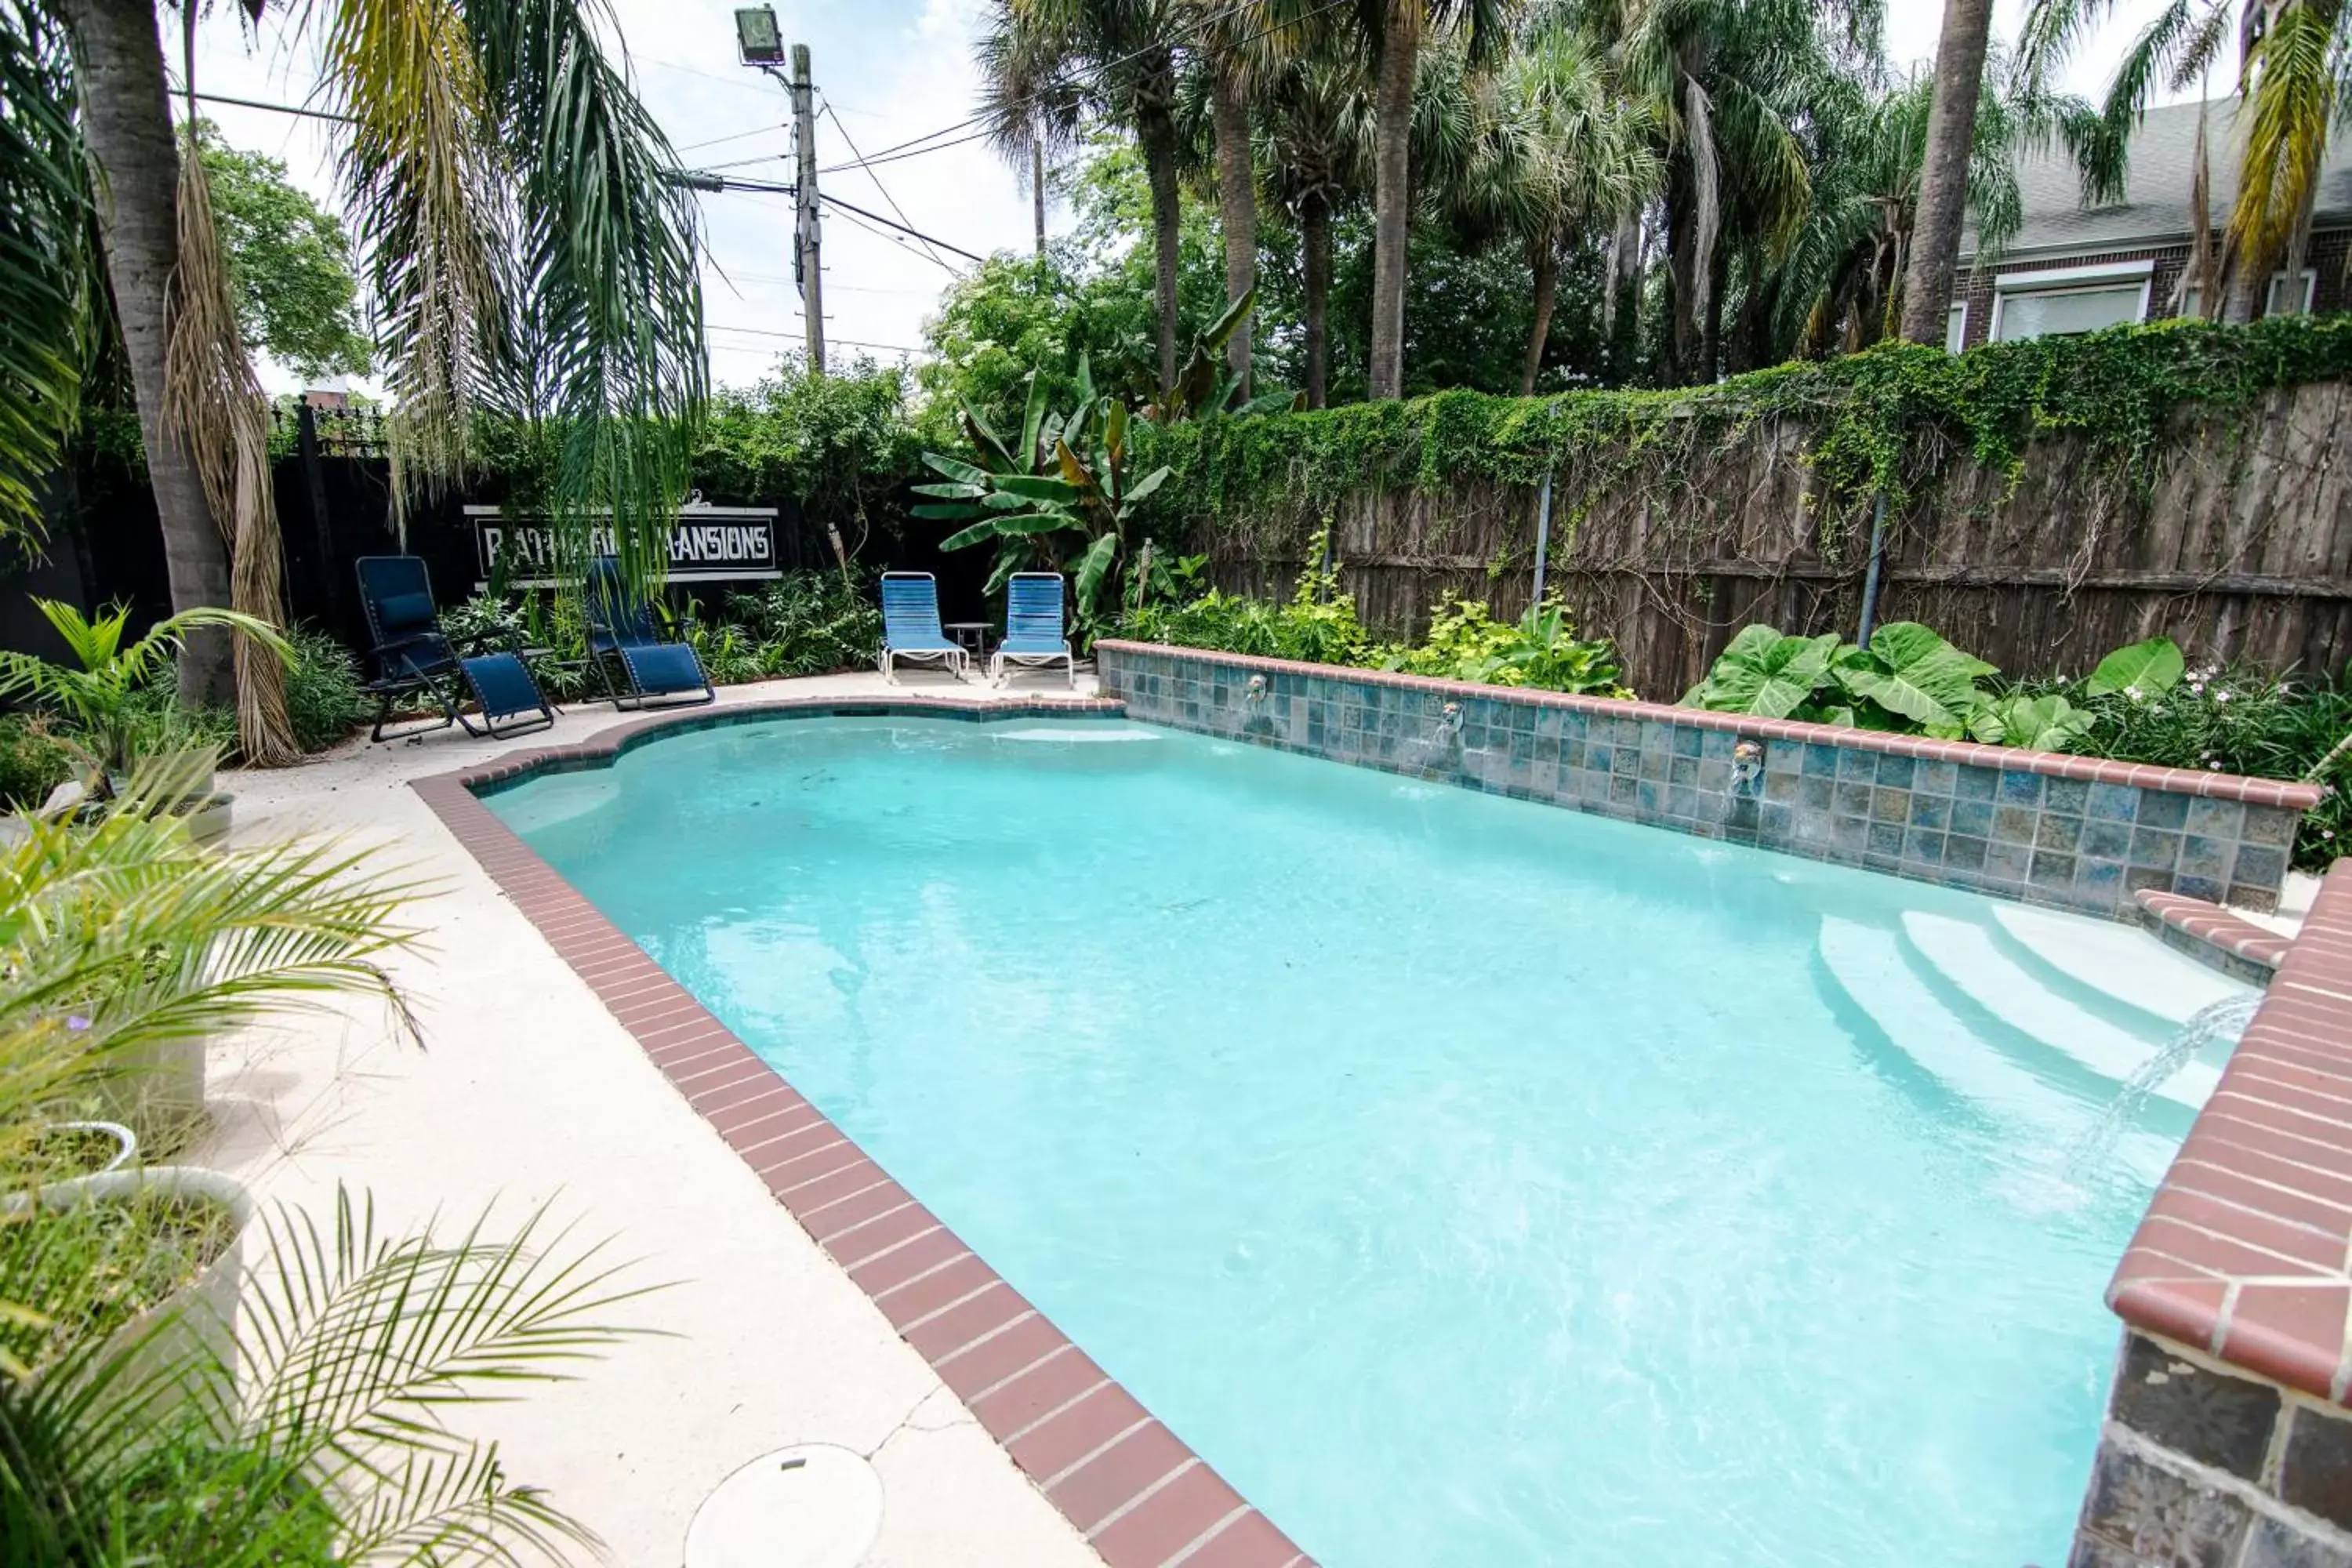 Property building, Swimming Pool in Rathbone Mansions New Orleans